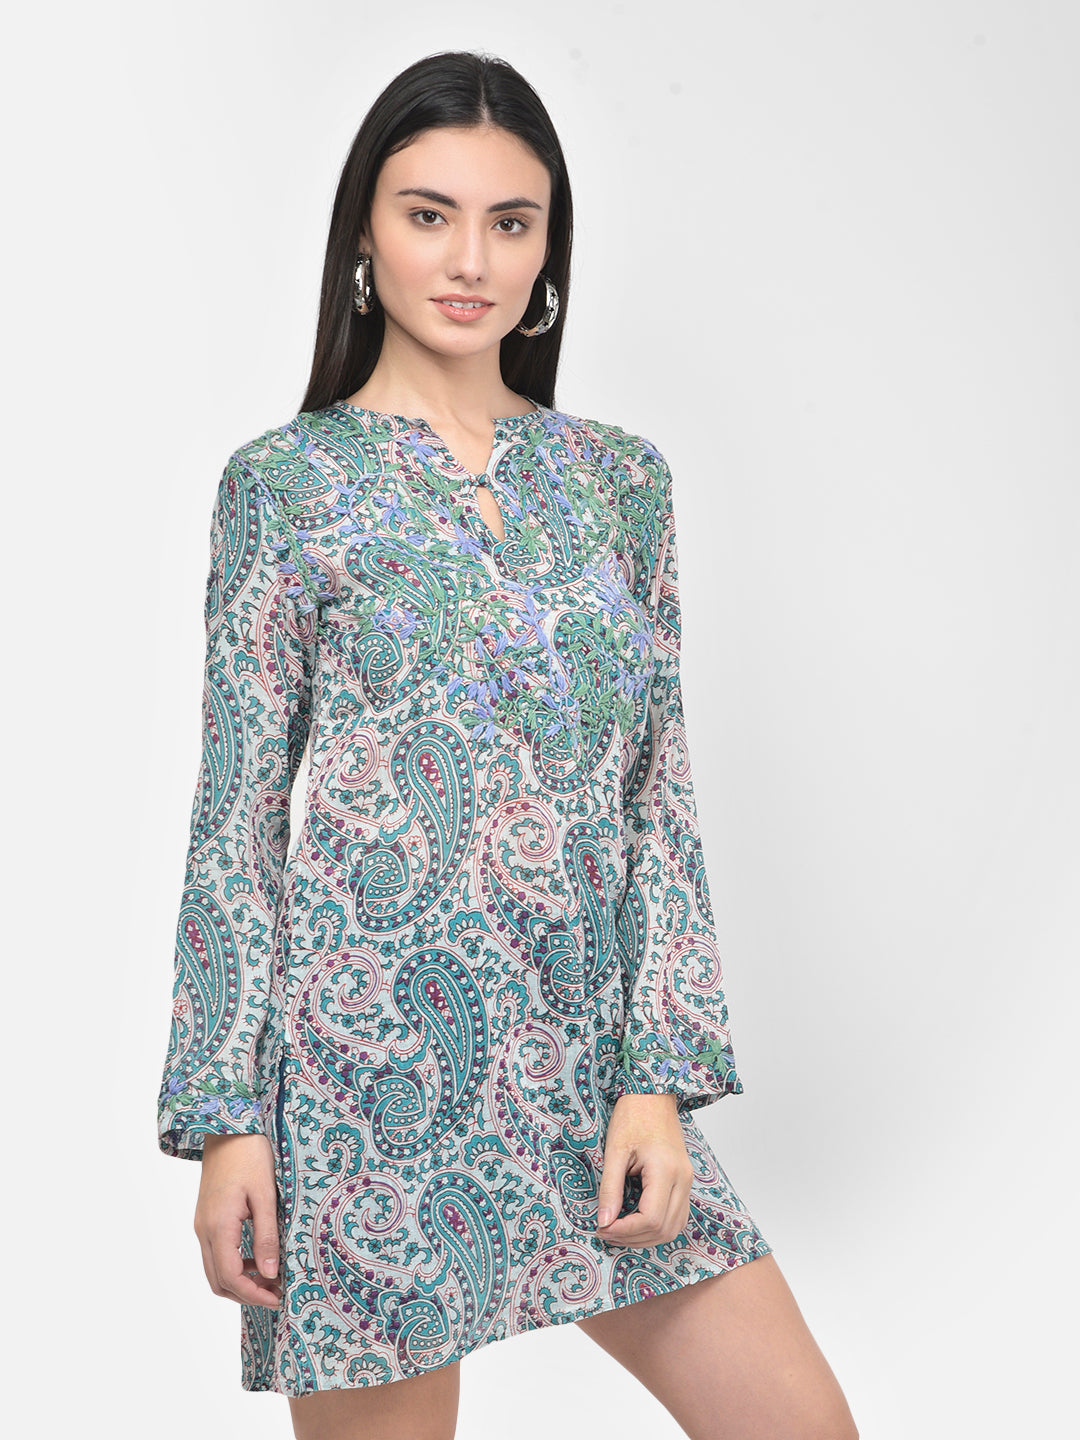 Printed and hand embroidered cotton tunic